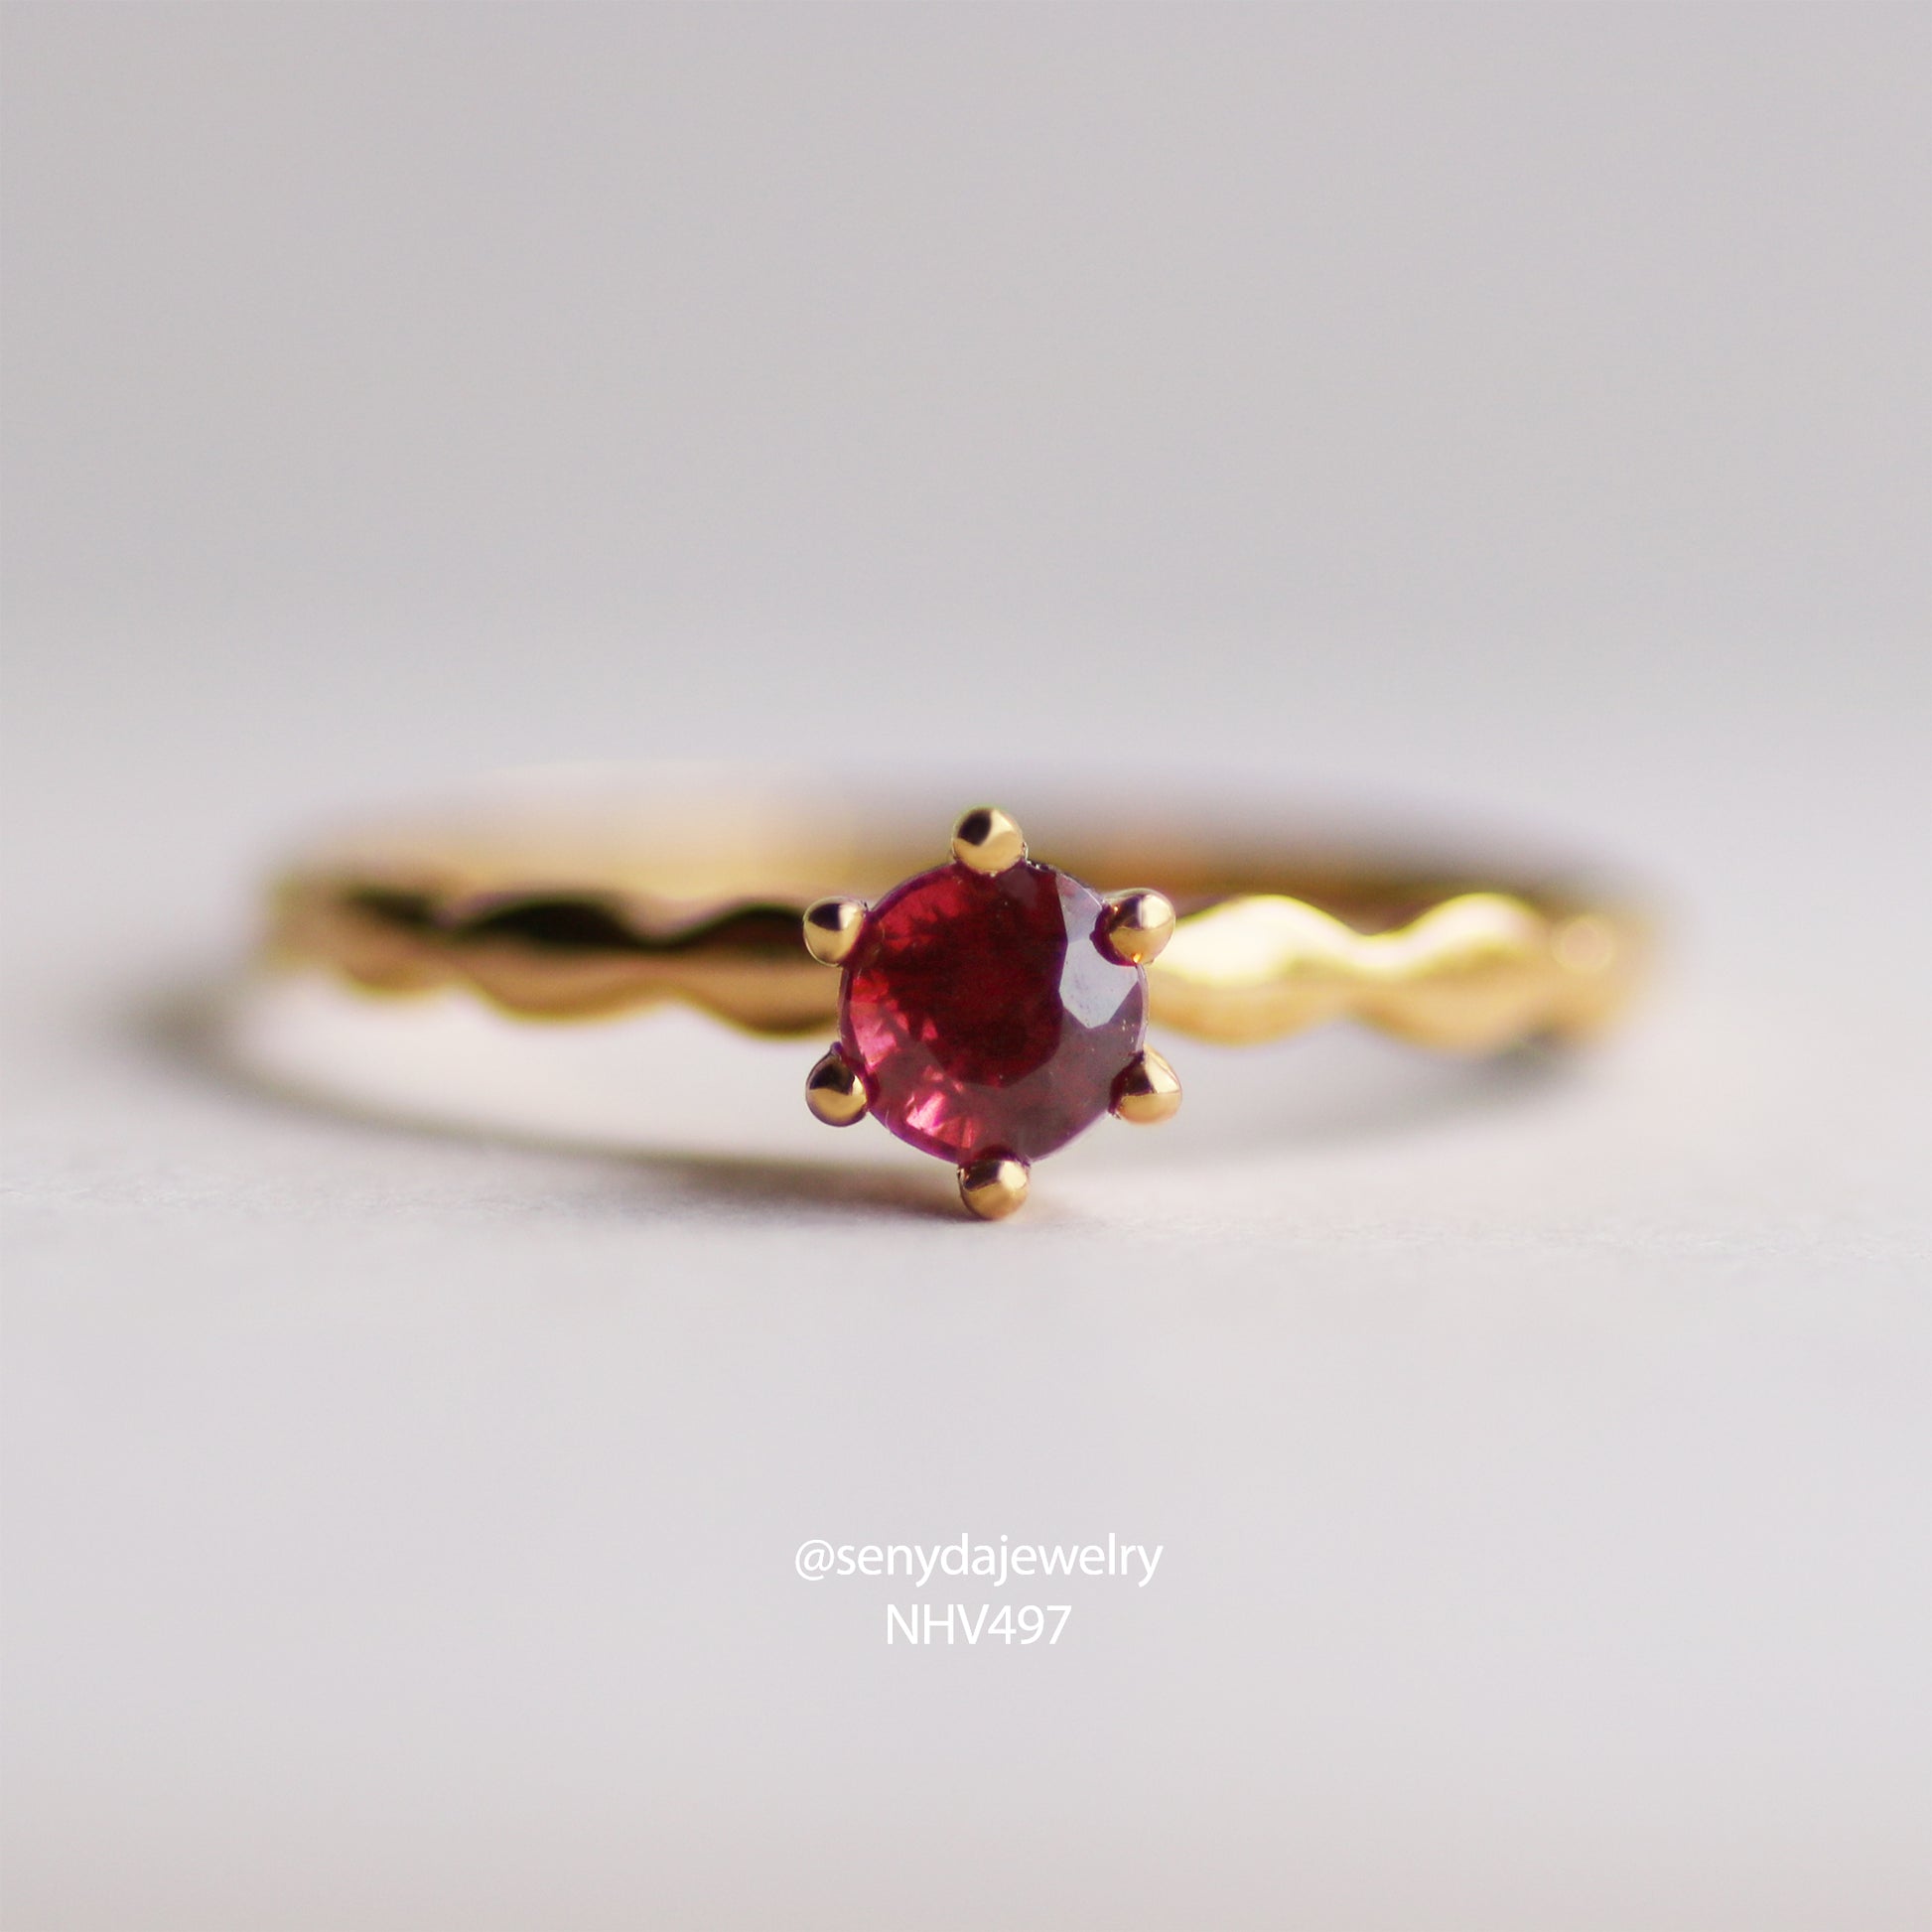 Senyda 16K Solid Gold Round - Shaped Brilliant Cut Natural Red Spinel Ring